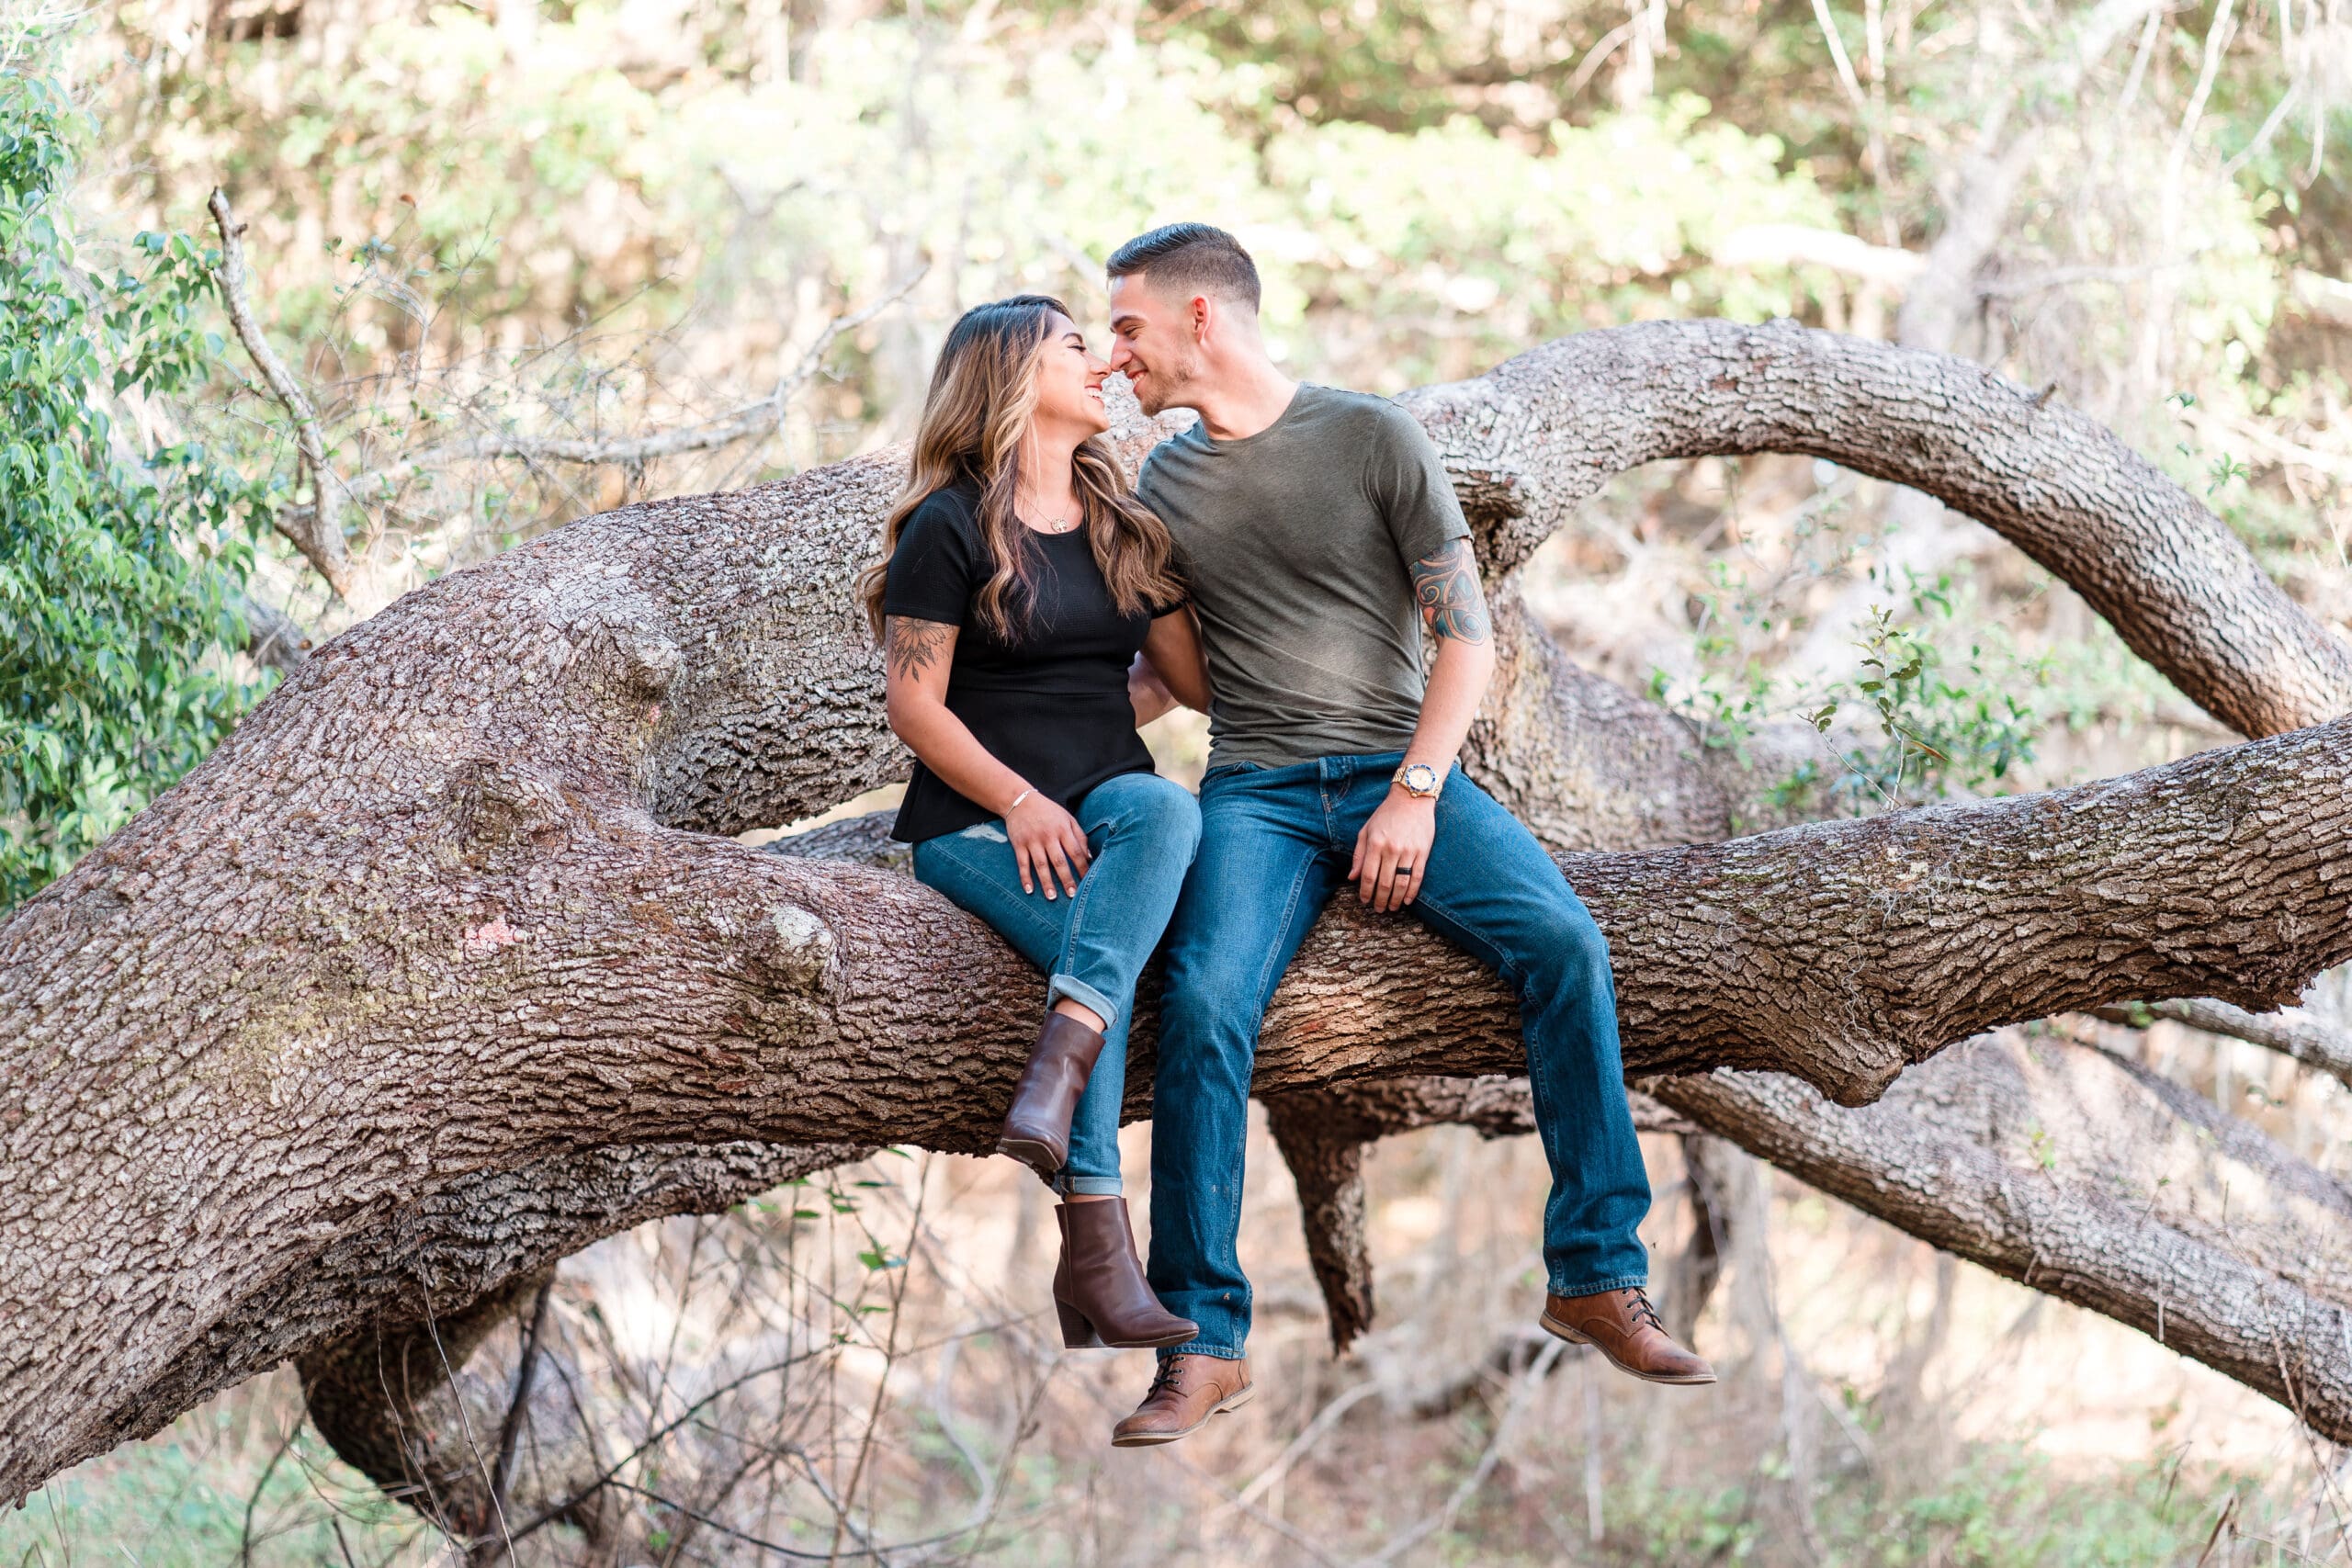 Engagement photo of couple sitting on a tree branch, touching noses, looking into each other's eyes with nature in the background - very unique picture.